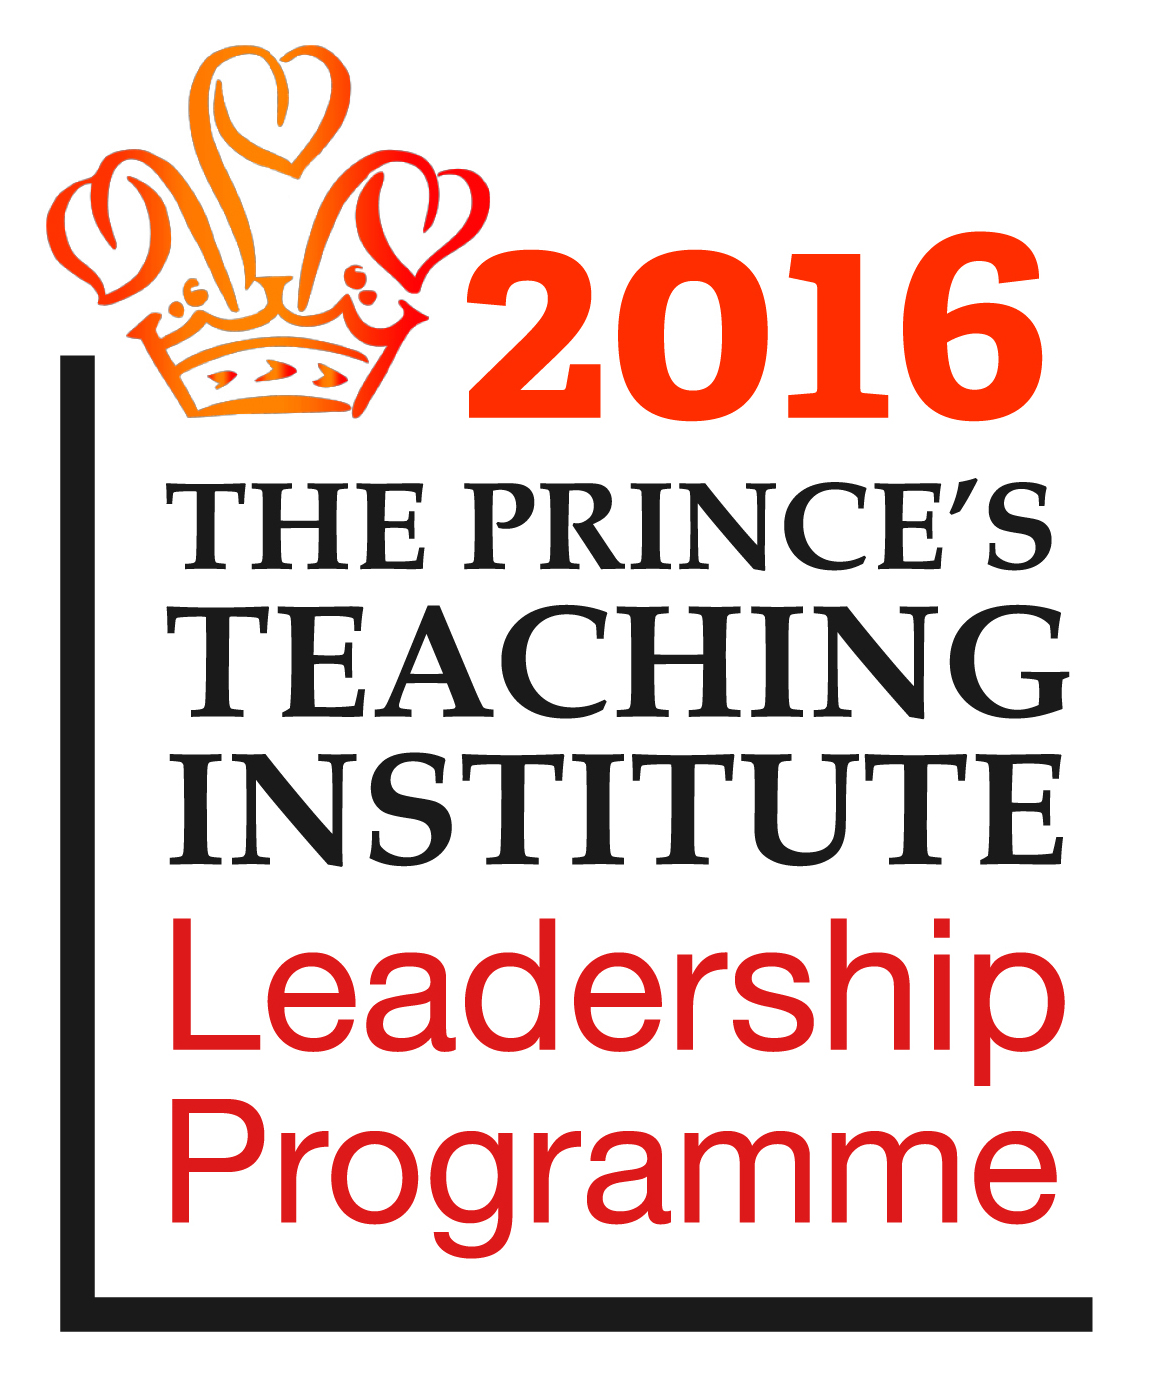 The Prince's Teaching Institute Leadership Programme 2016